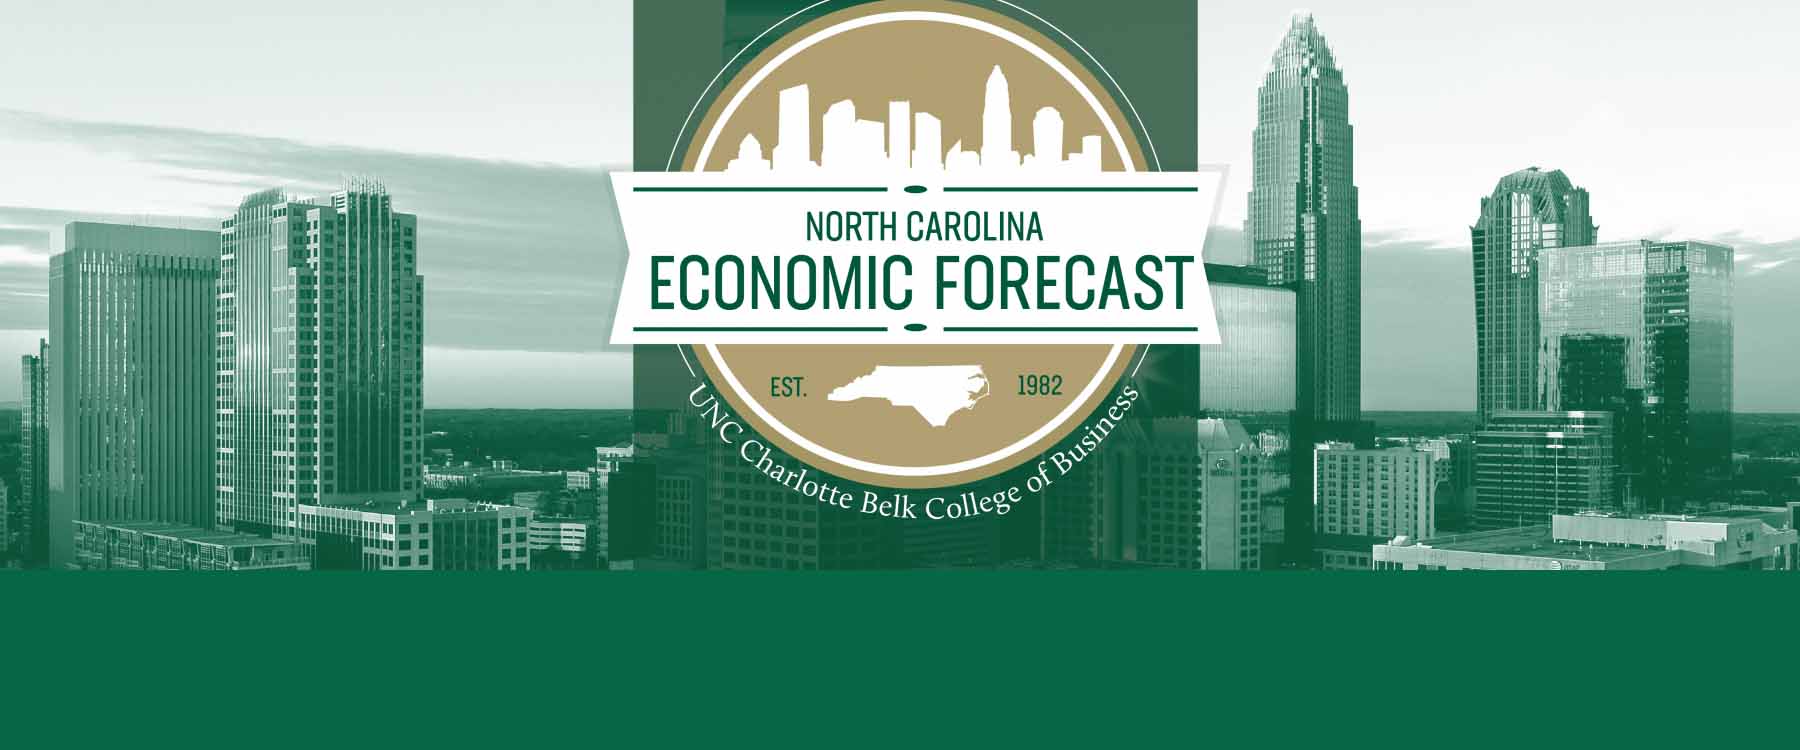 The gap between the consumer price index for all urban consumers and the Fed Funds Rate remains too wide to reflect progress toward inflation reduction, according to John Connaughton, director of the North Carolina Economic Forecast. 